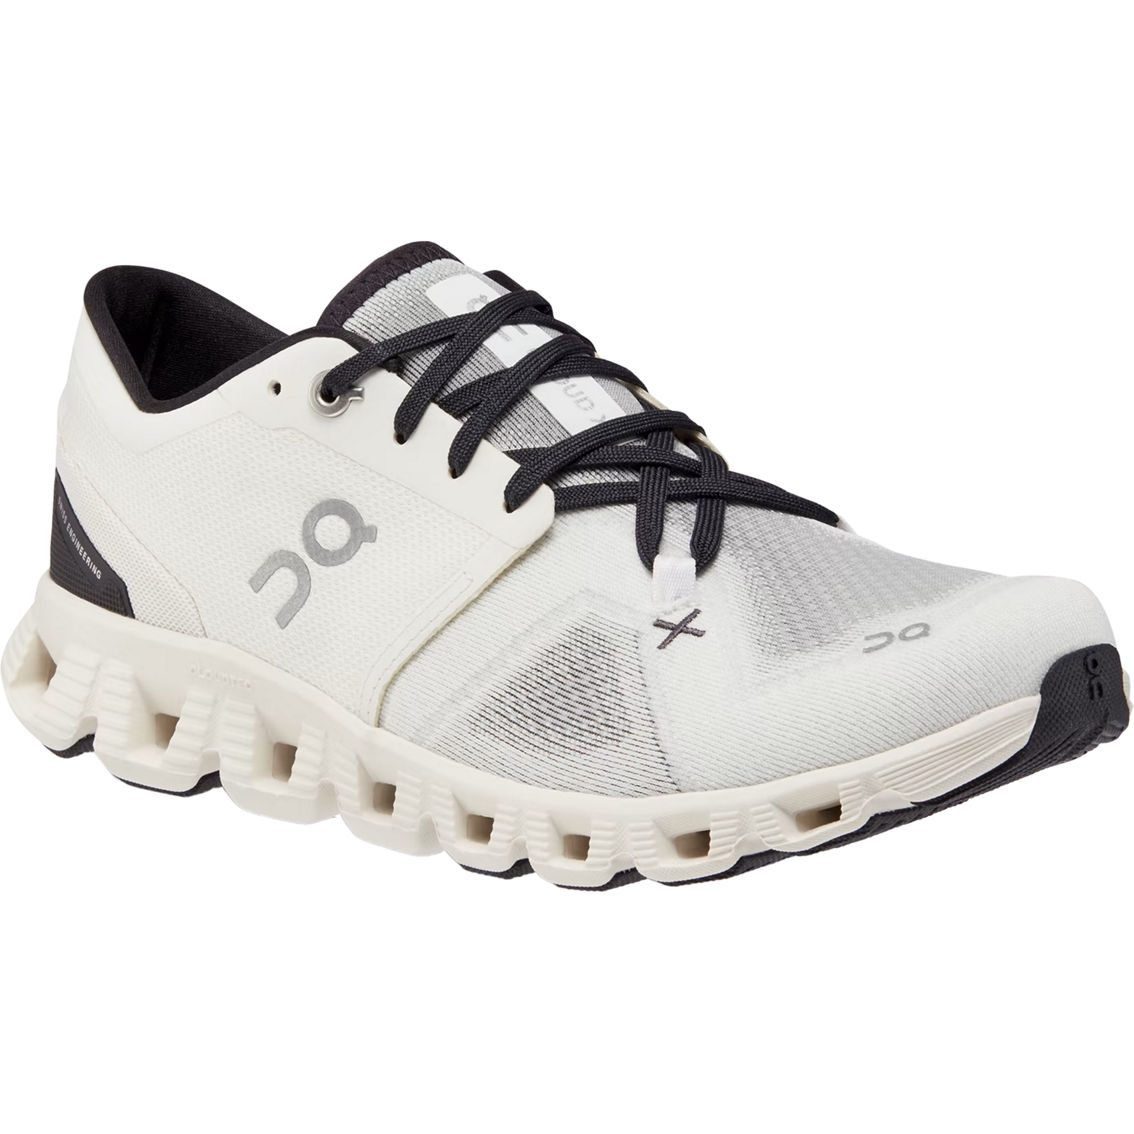 On Women's Cloud X 3 Running Shoes - Image 1 of 6